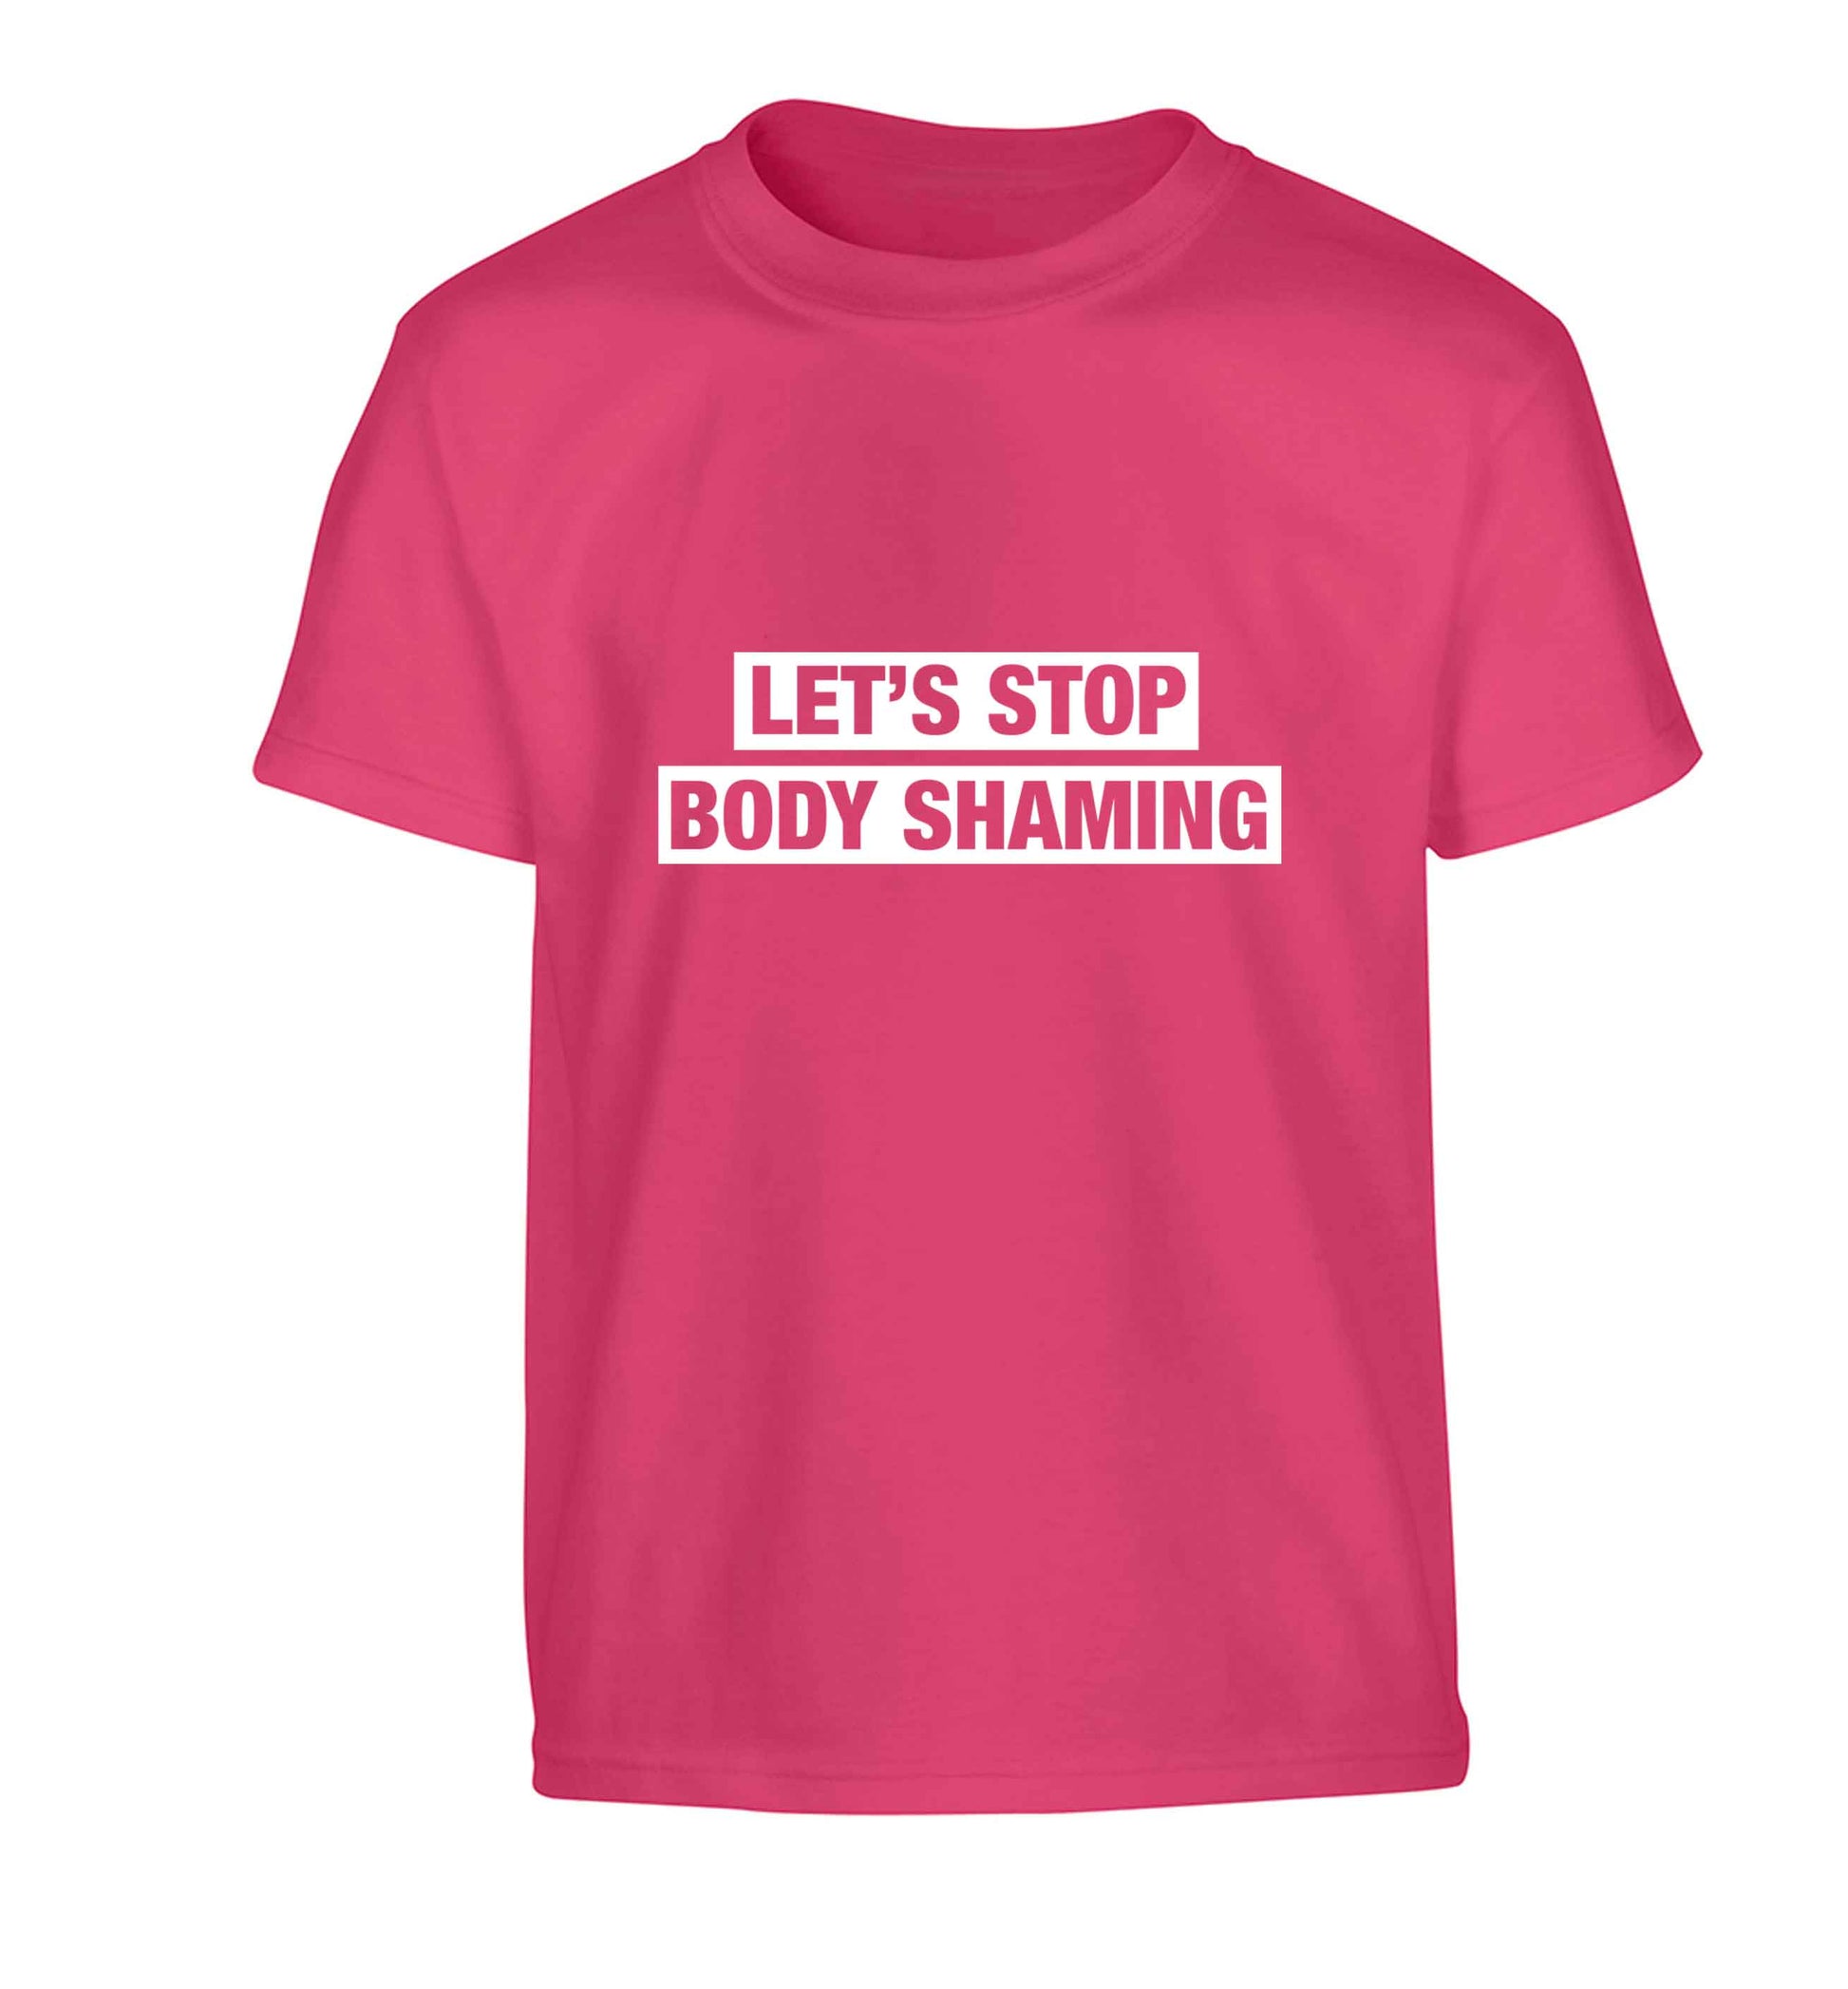 Let's stop body shaming Children's pink Tshirt 12-13 Years